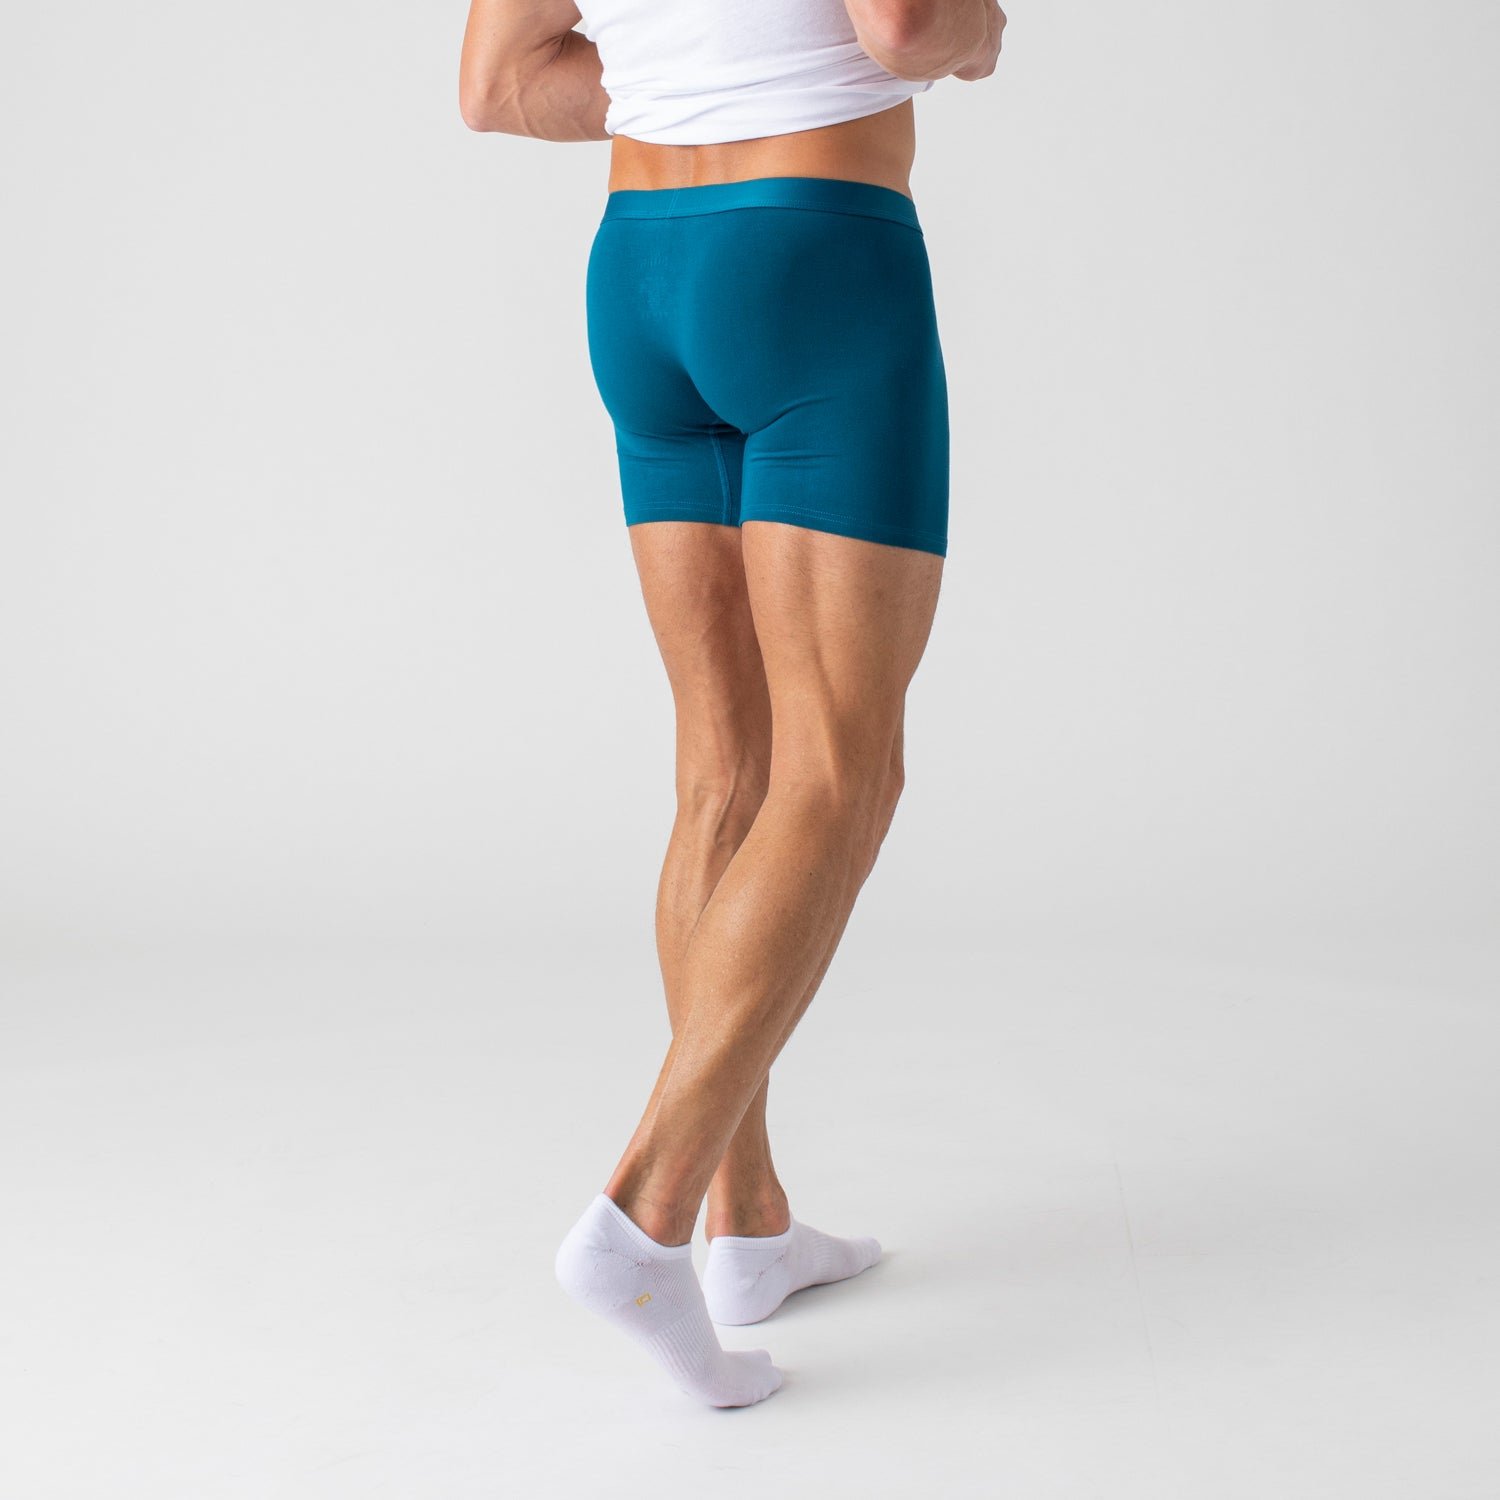 The Teal Brief 6-Pack